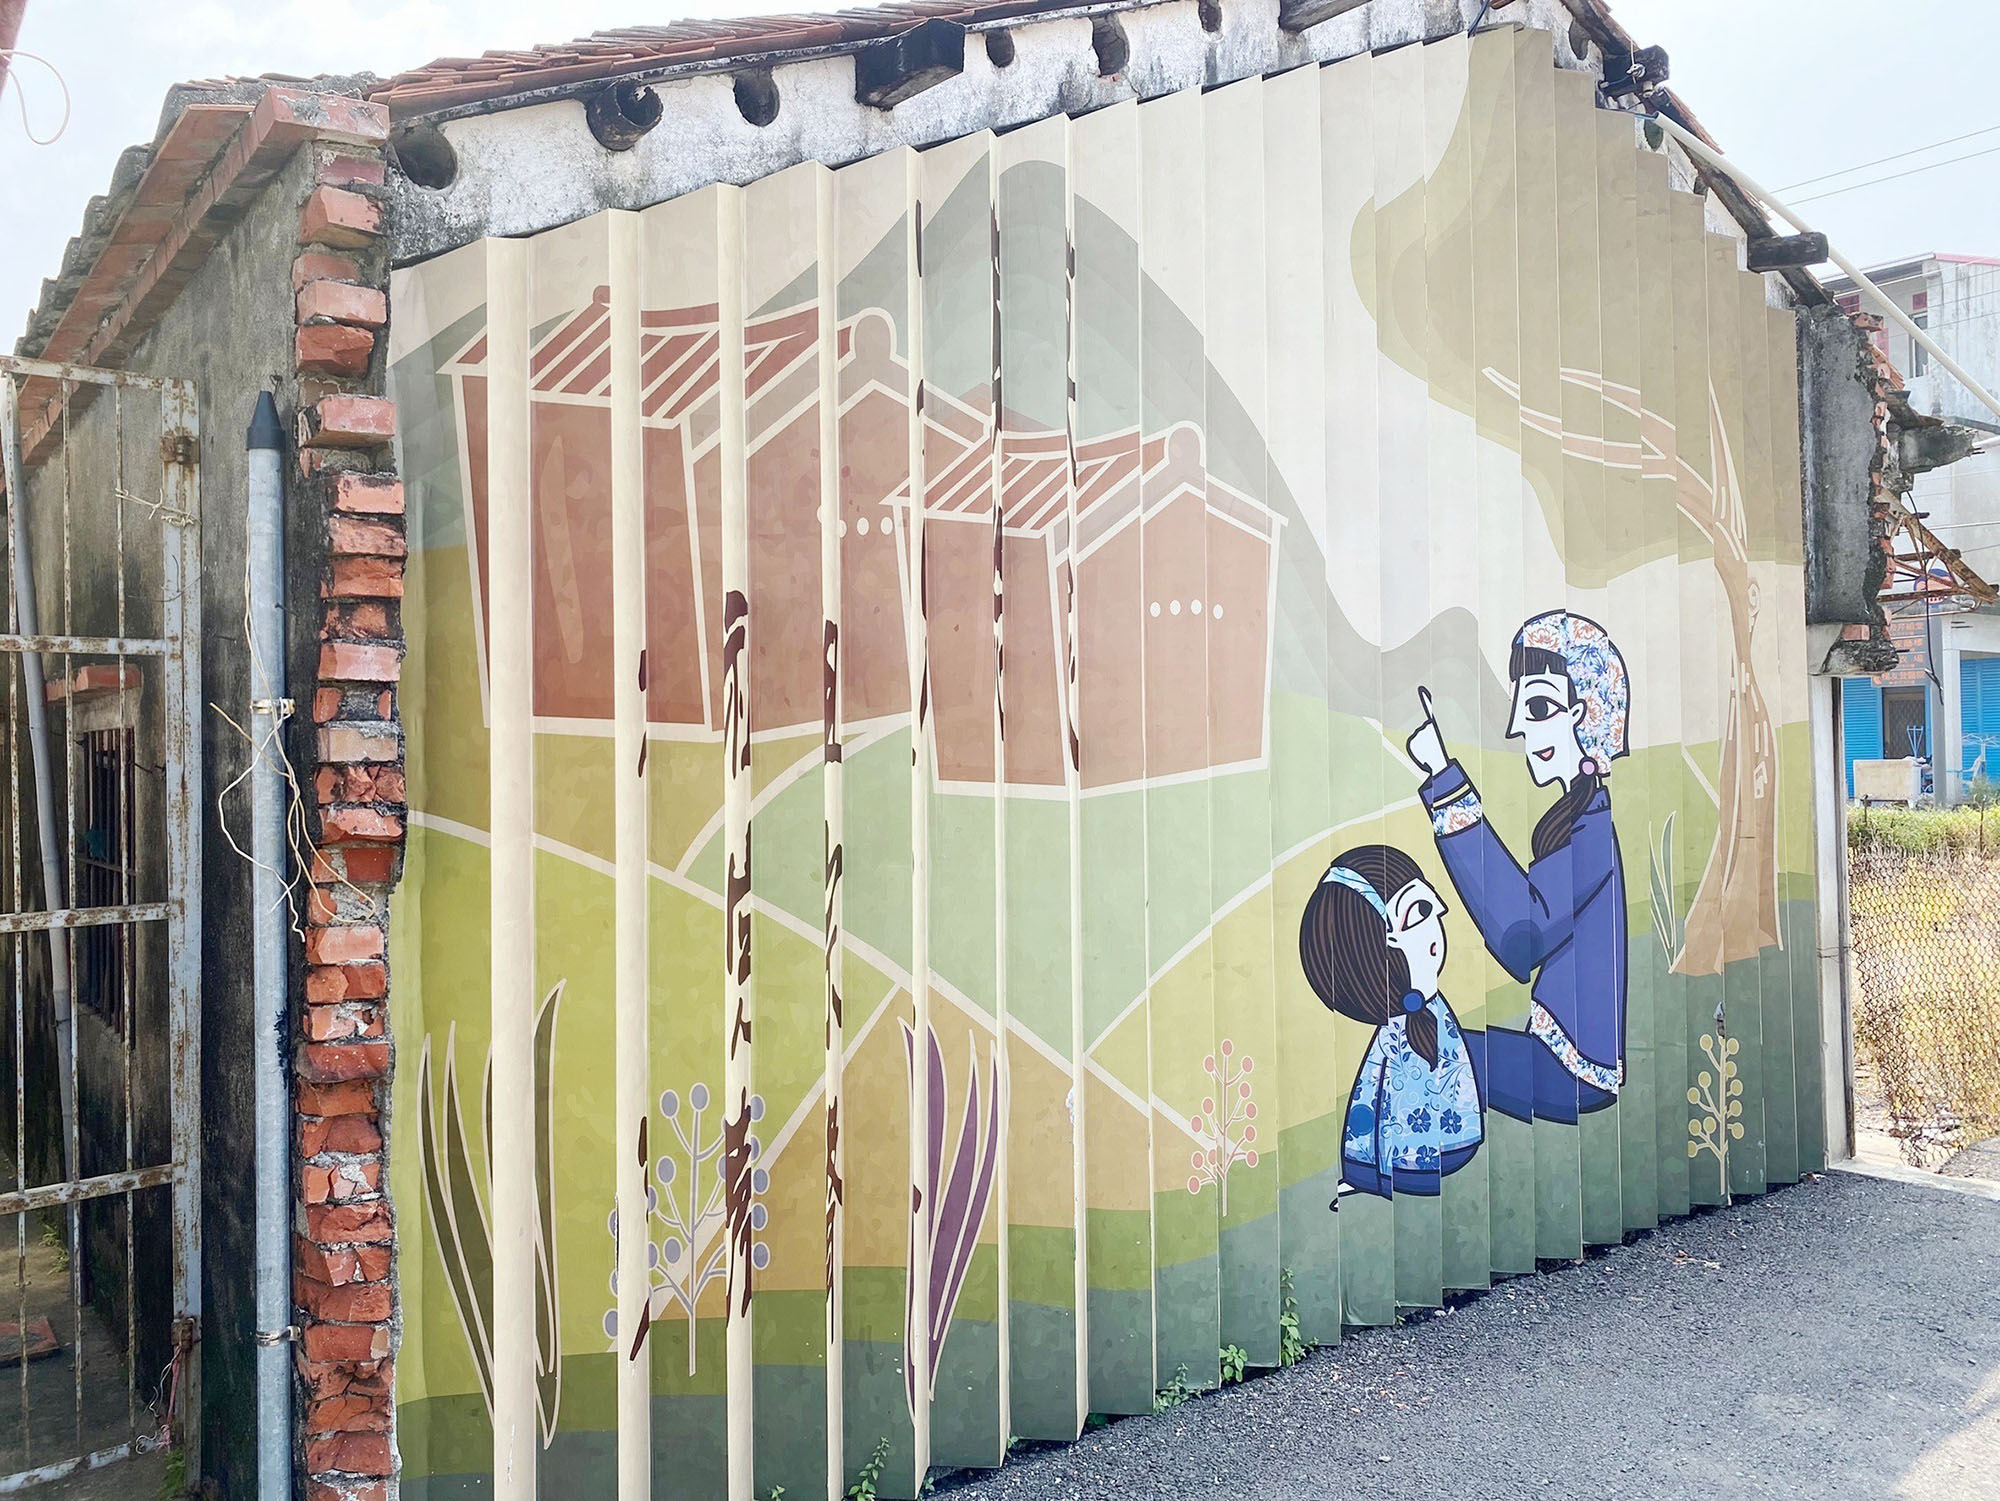 that the village's mural